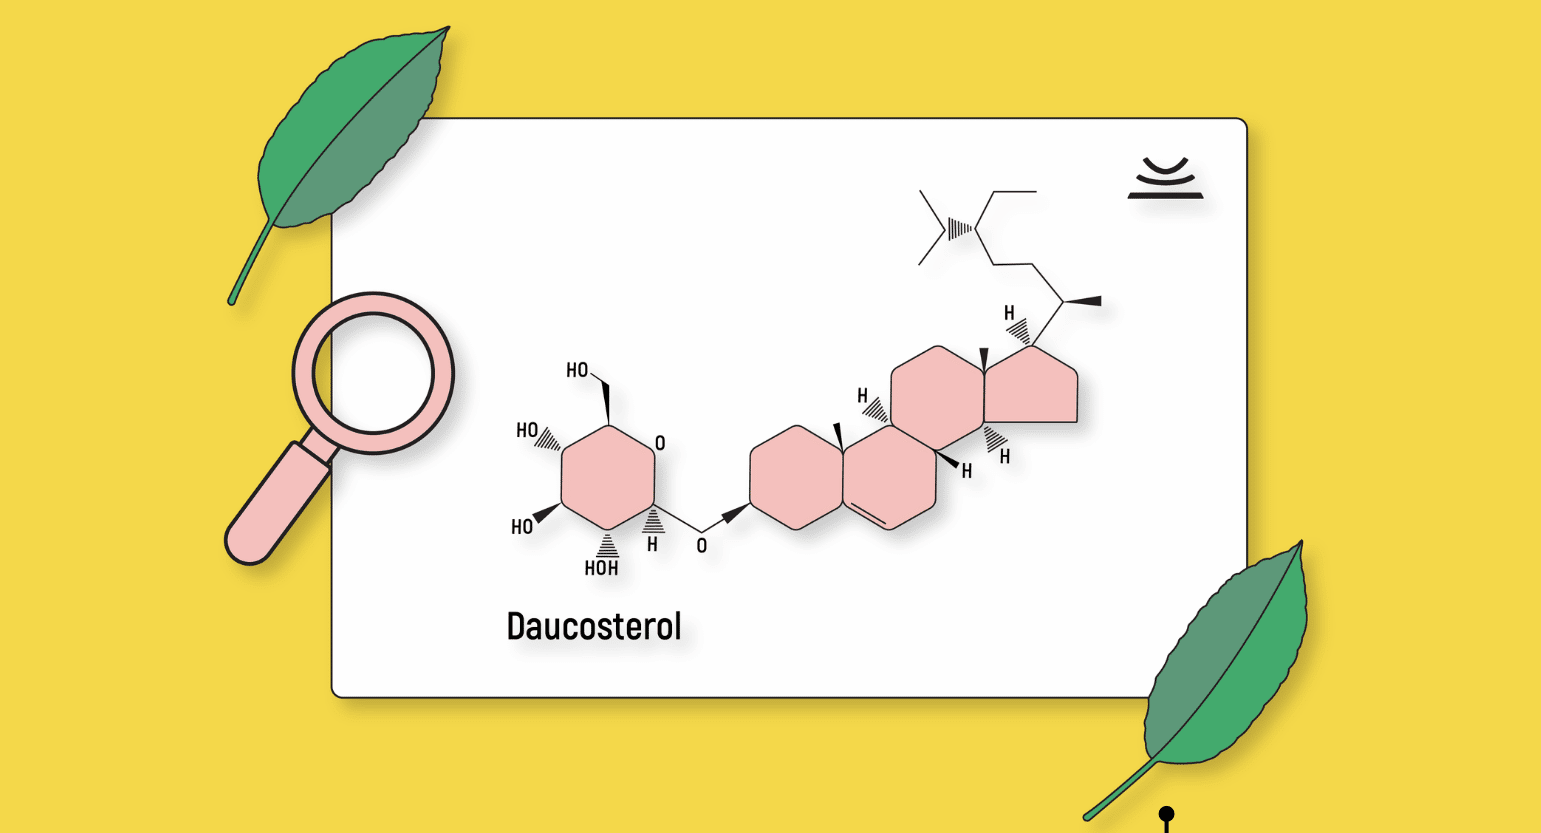 Daucosterol: What This Kratom Alkaloid Does & Why It’s Important